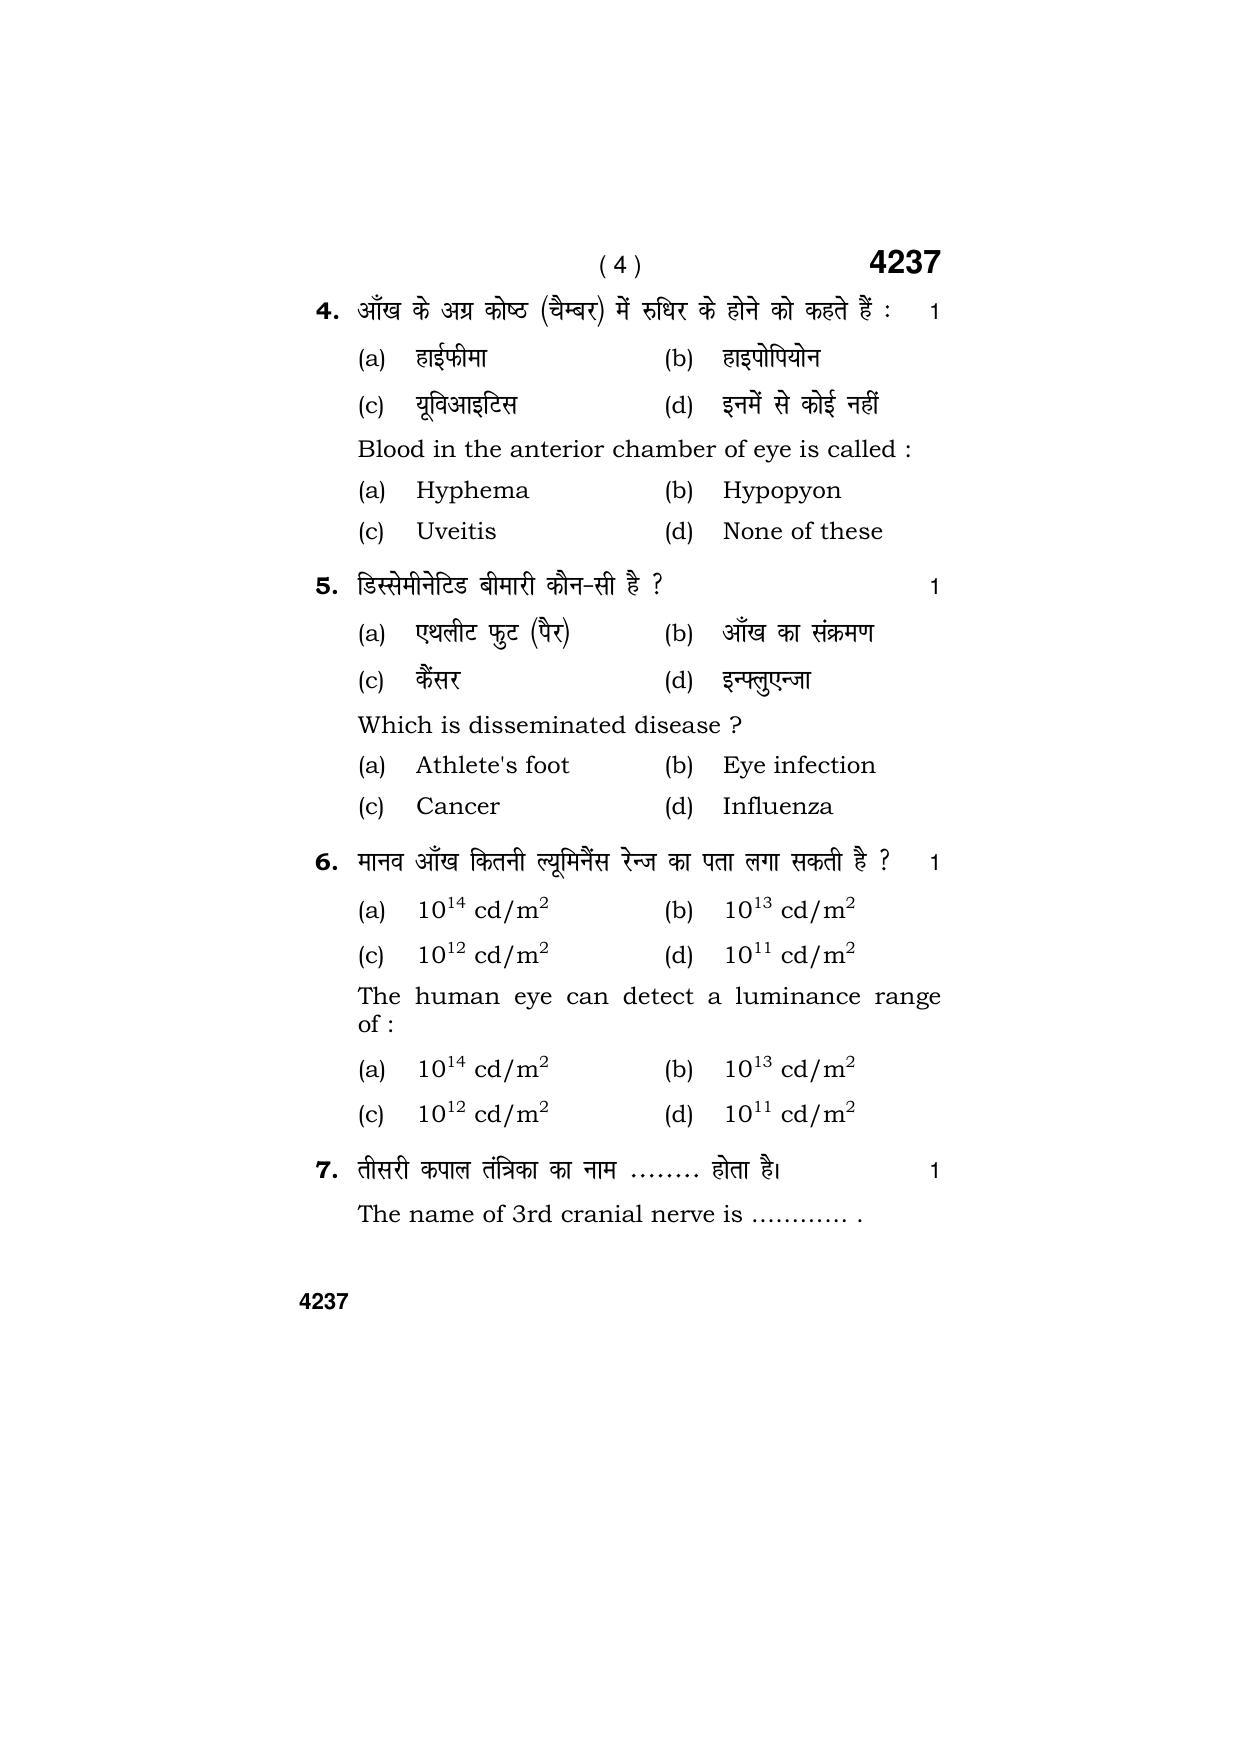 Haryana Board HBSE Class 10 Vision Technician 2019 Question Paper - Page 4